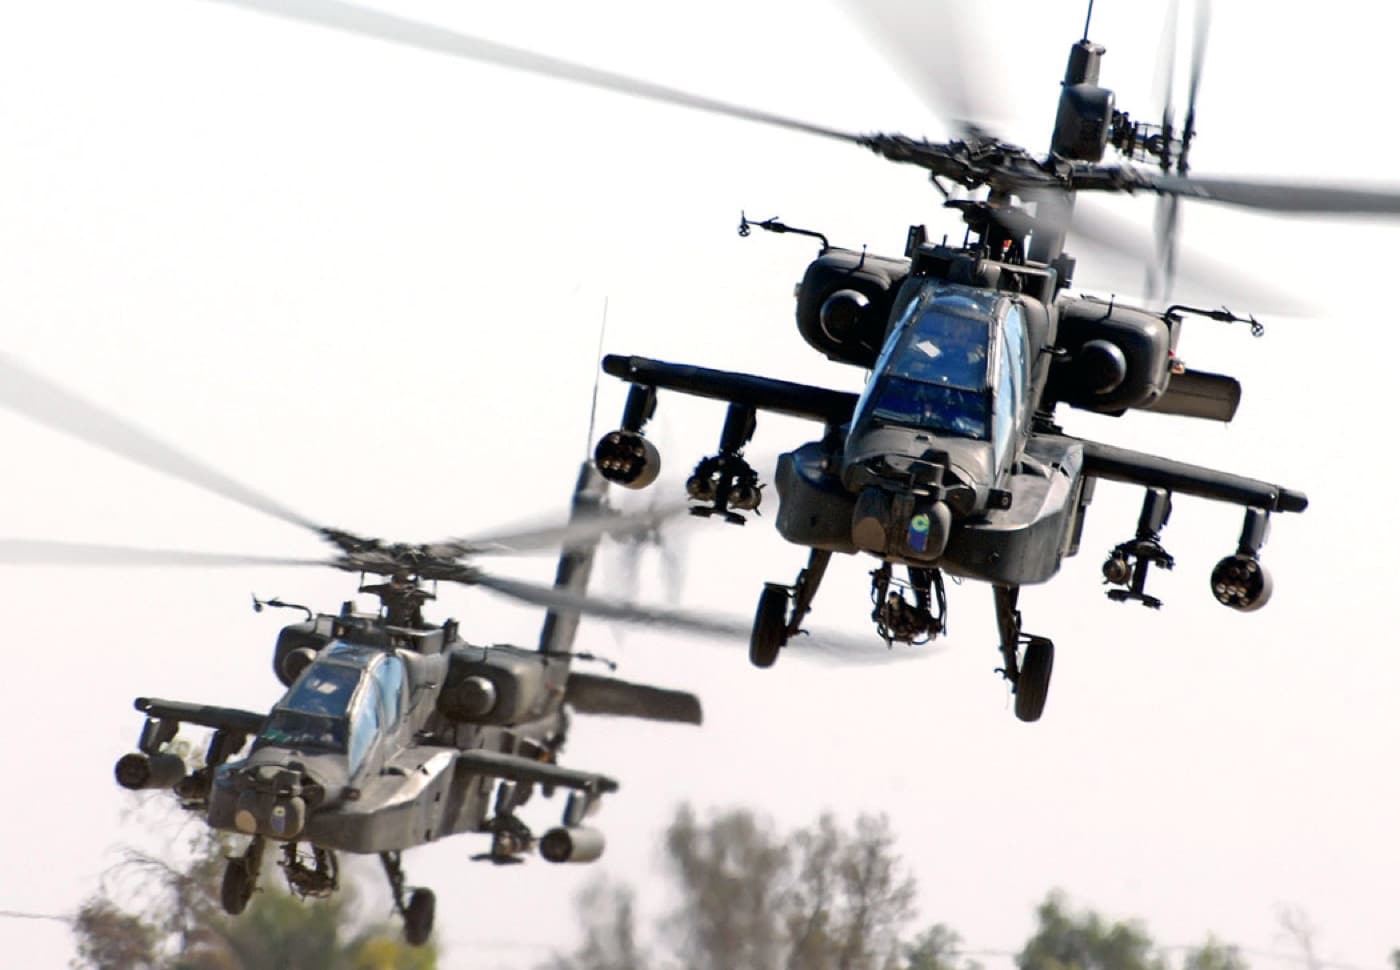 ah-64 apache helicopters in iraq